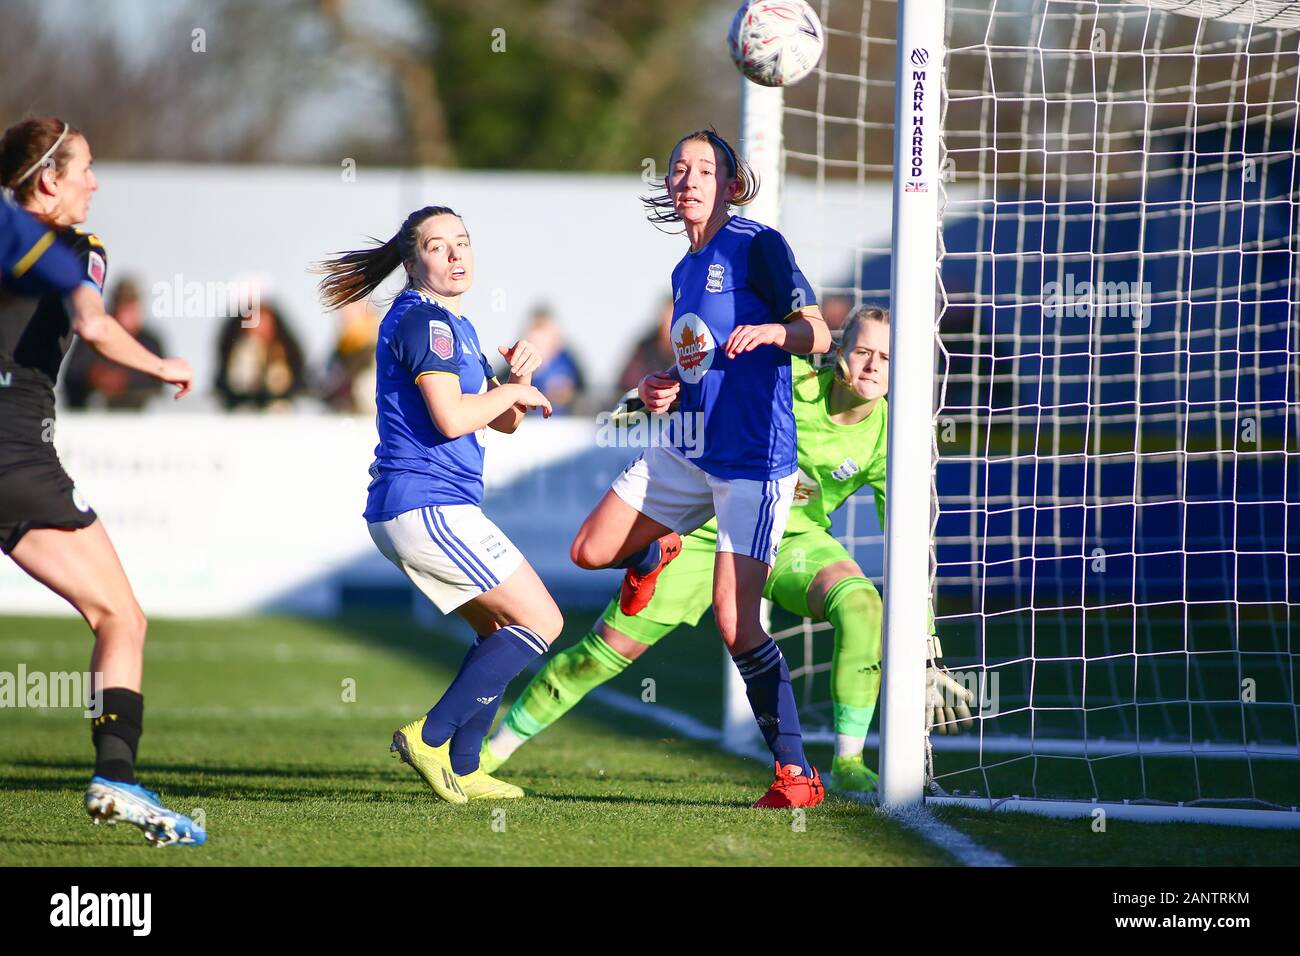 Birmingham, UK. 19th January 2020. Birmingham City's Lucy Whipp clears the ball from the goal line. BCFC 0 - 2 Man City. Peter Lopeman/Alamy Live News Stock Photo